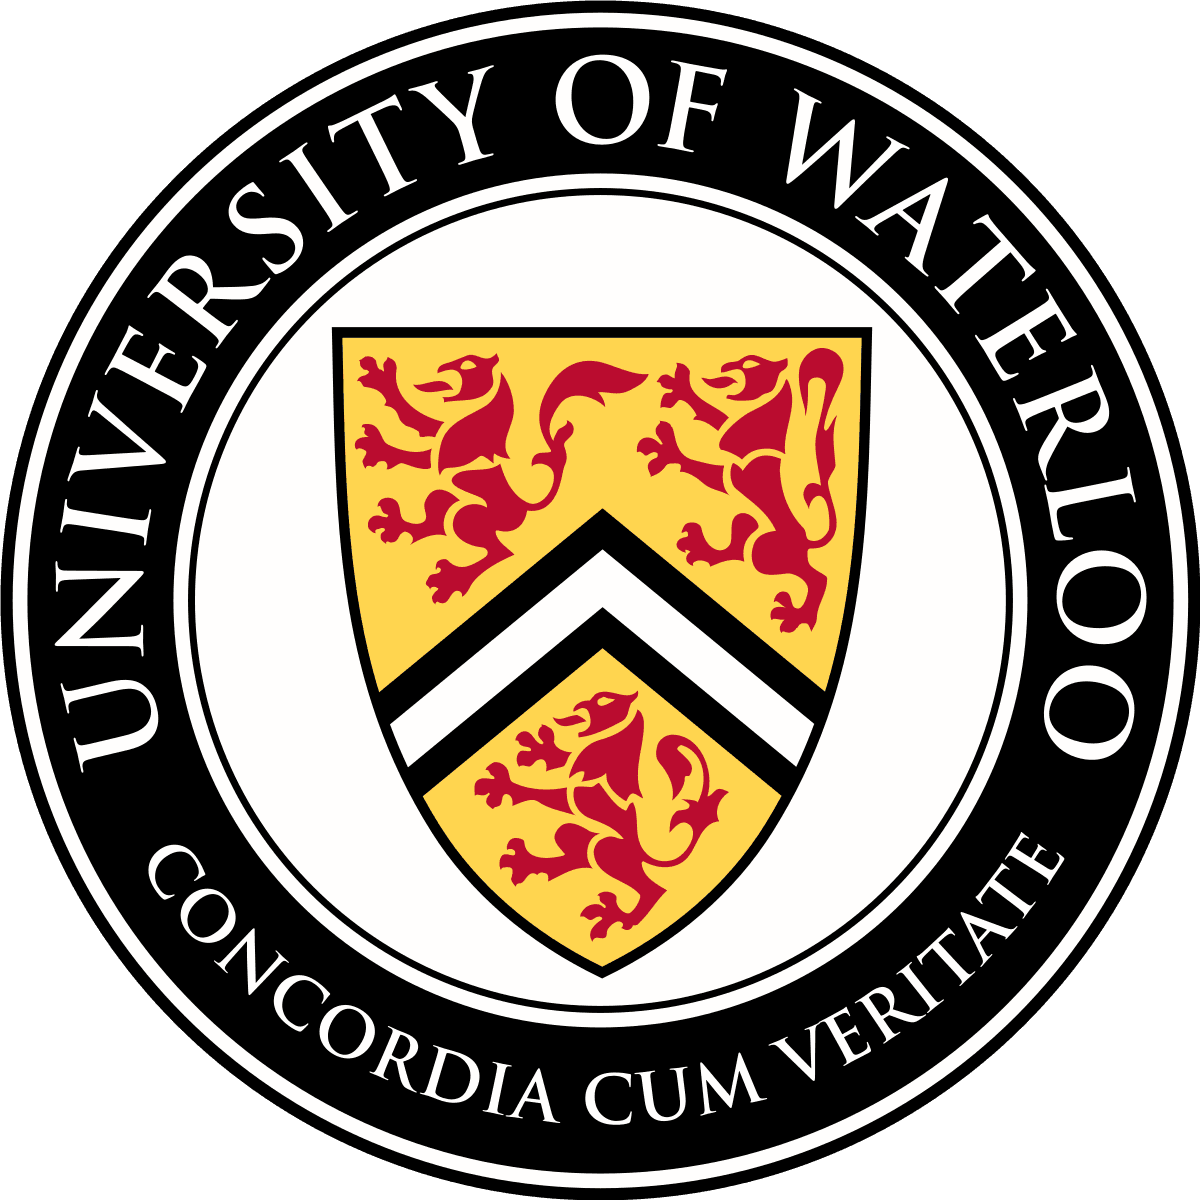 Computer Science - MMath (Quantum Information) at Waterloo